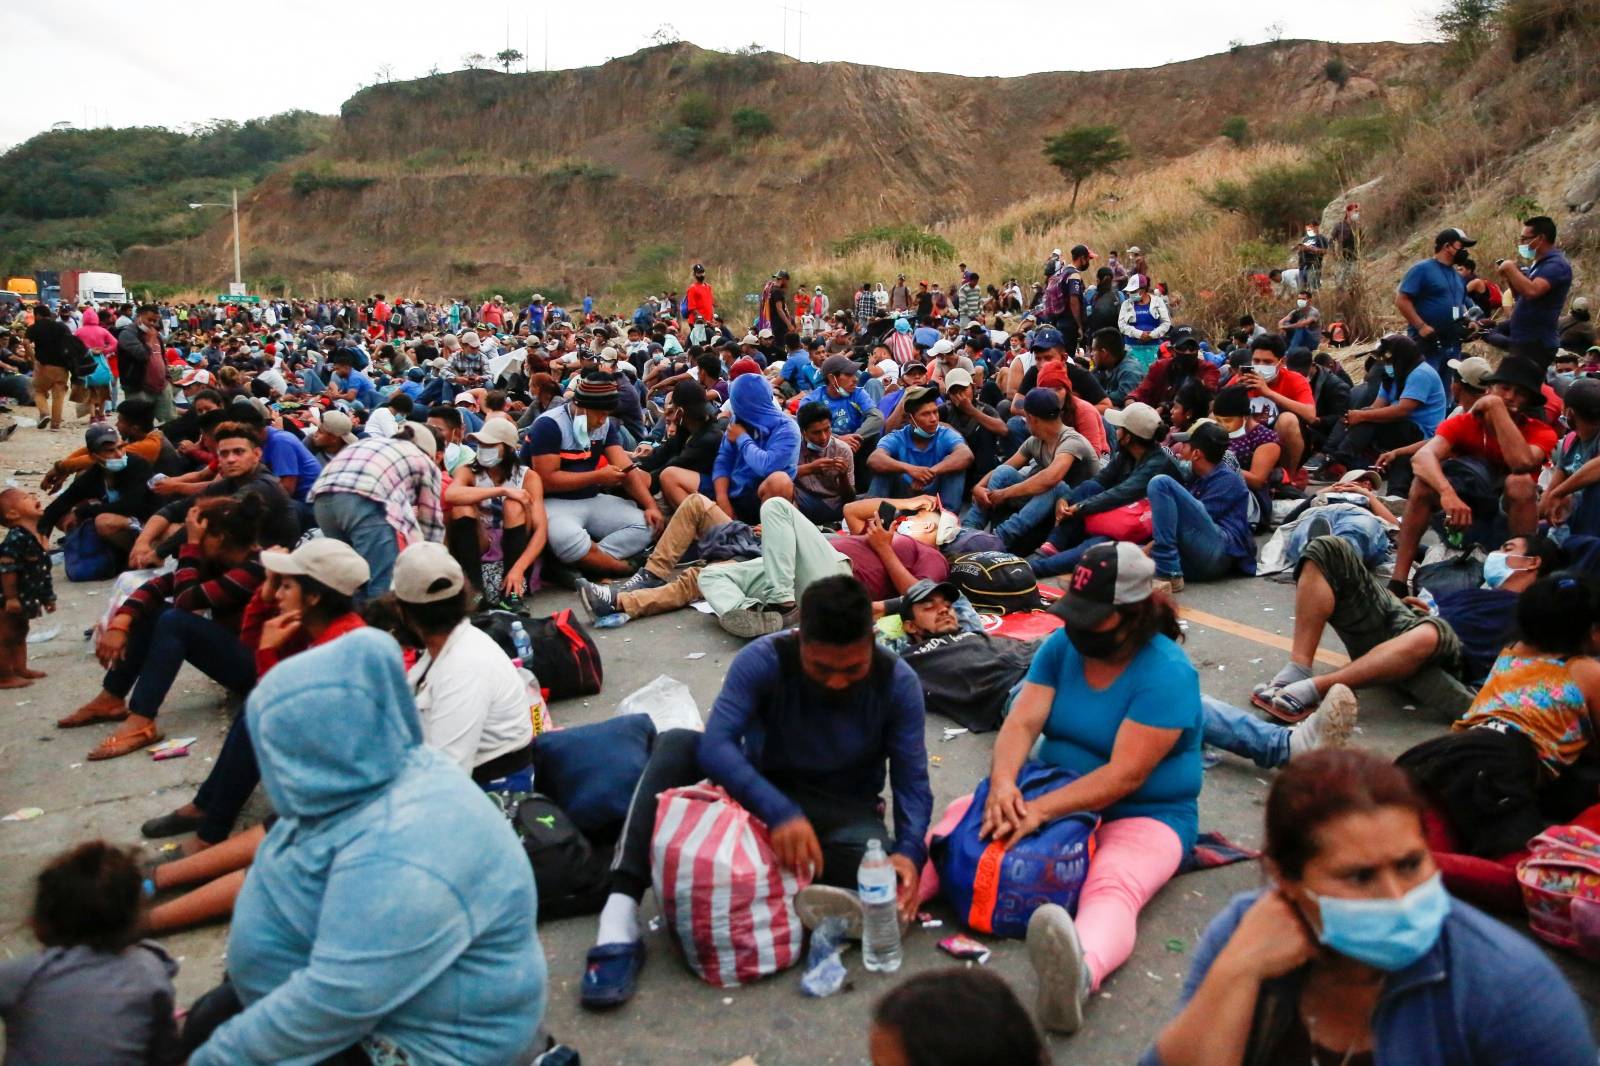 Hondurans take part in a new caravan of migrants, set to head to the United States, in Vado Hondo